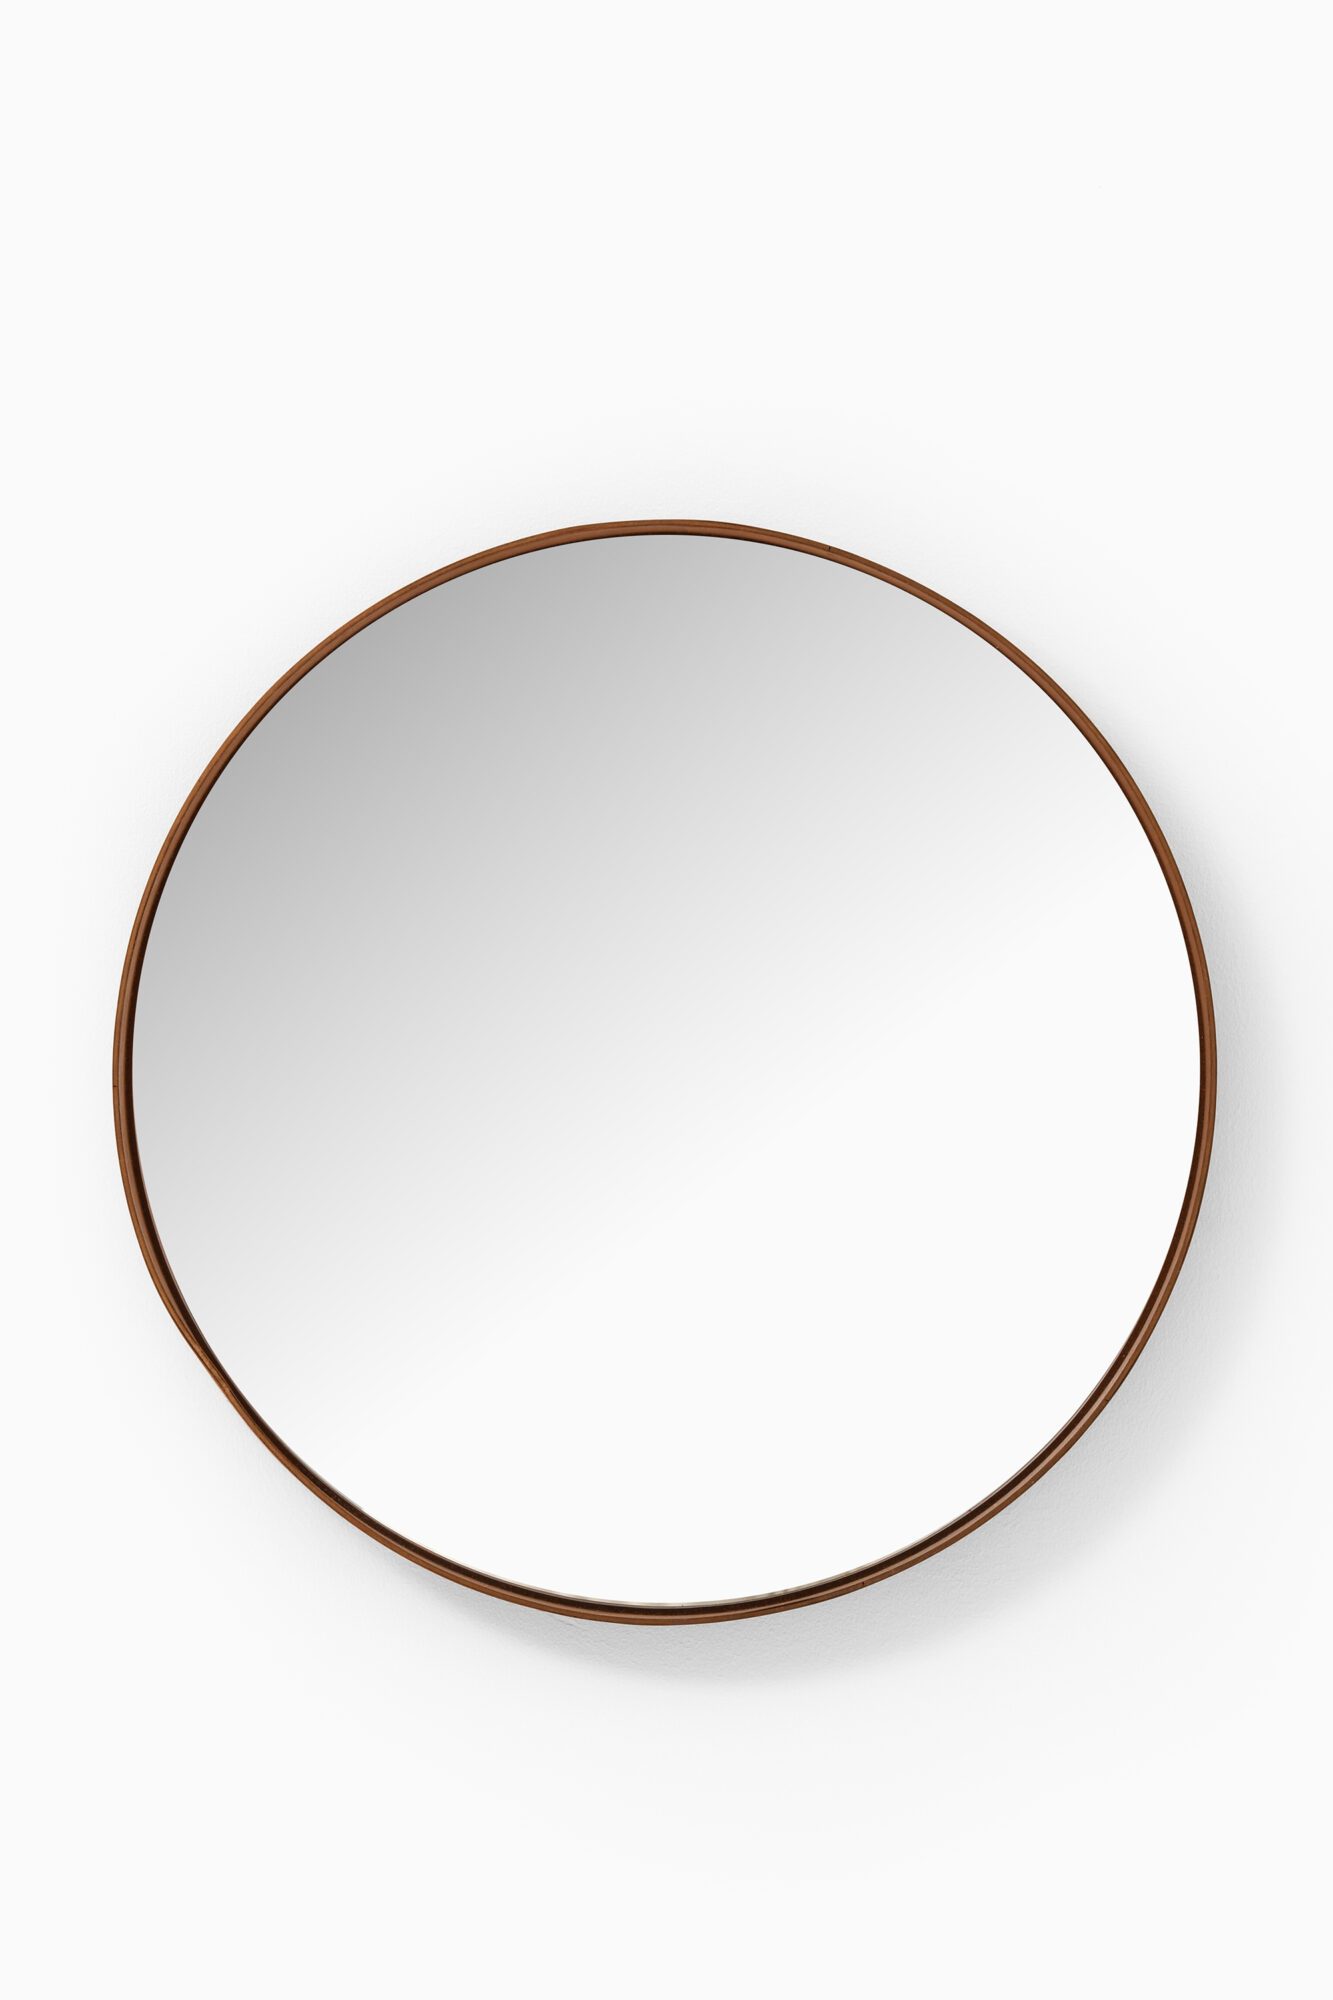 Mirror in teak and leather by Glas Mäster at Studio Schalling